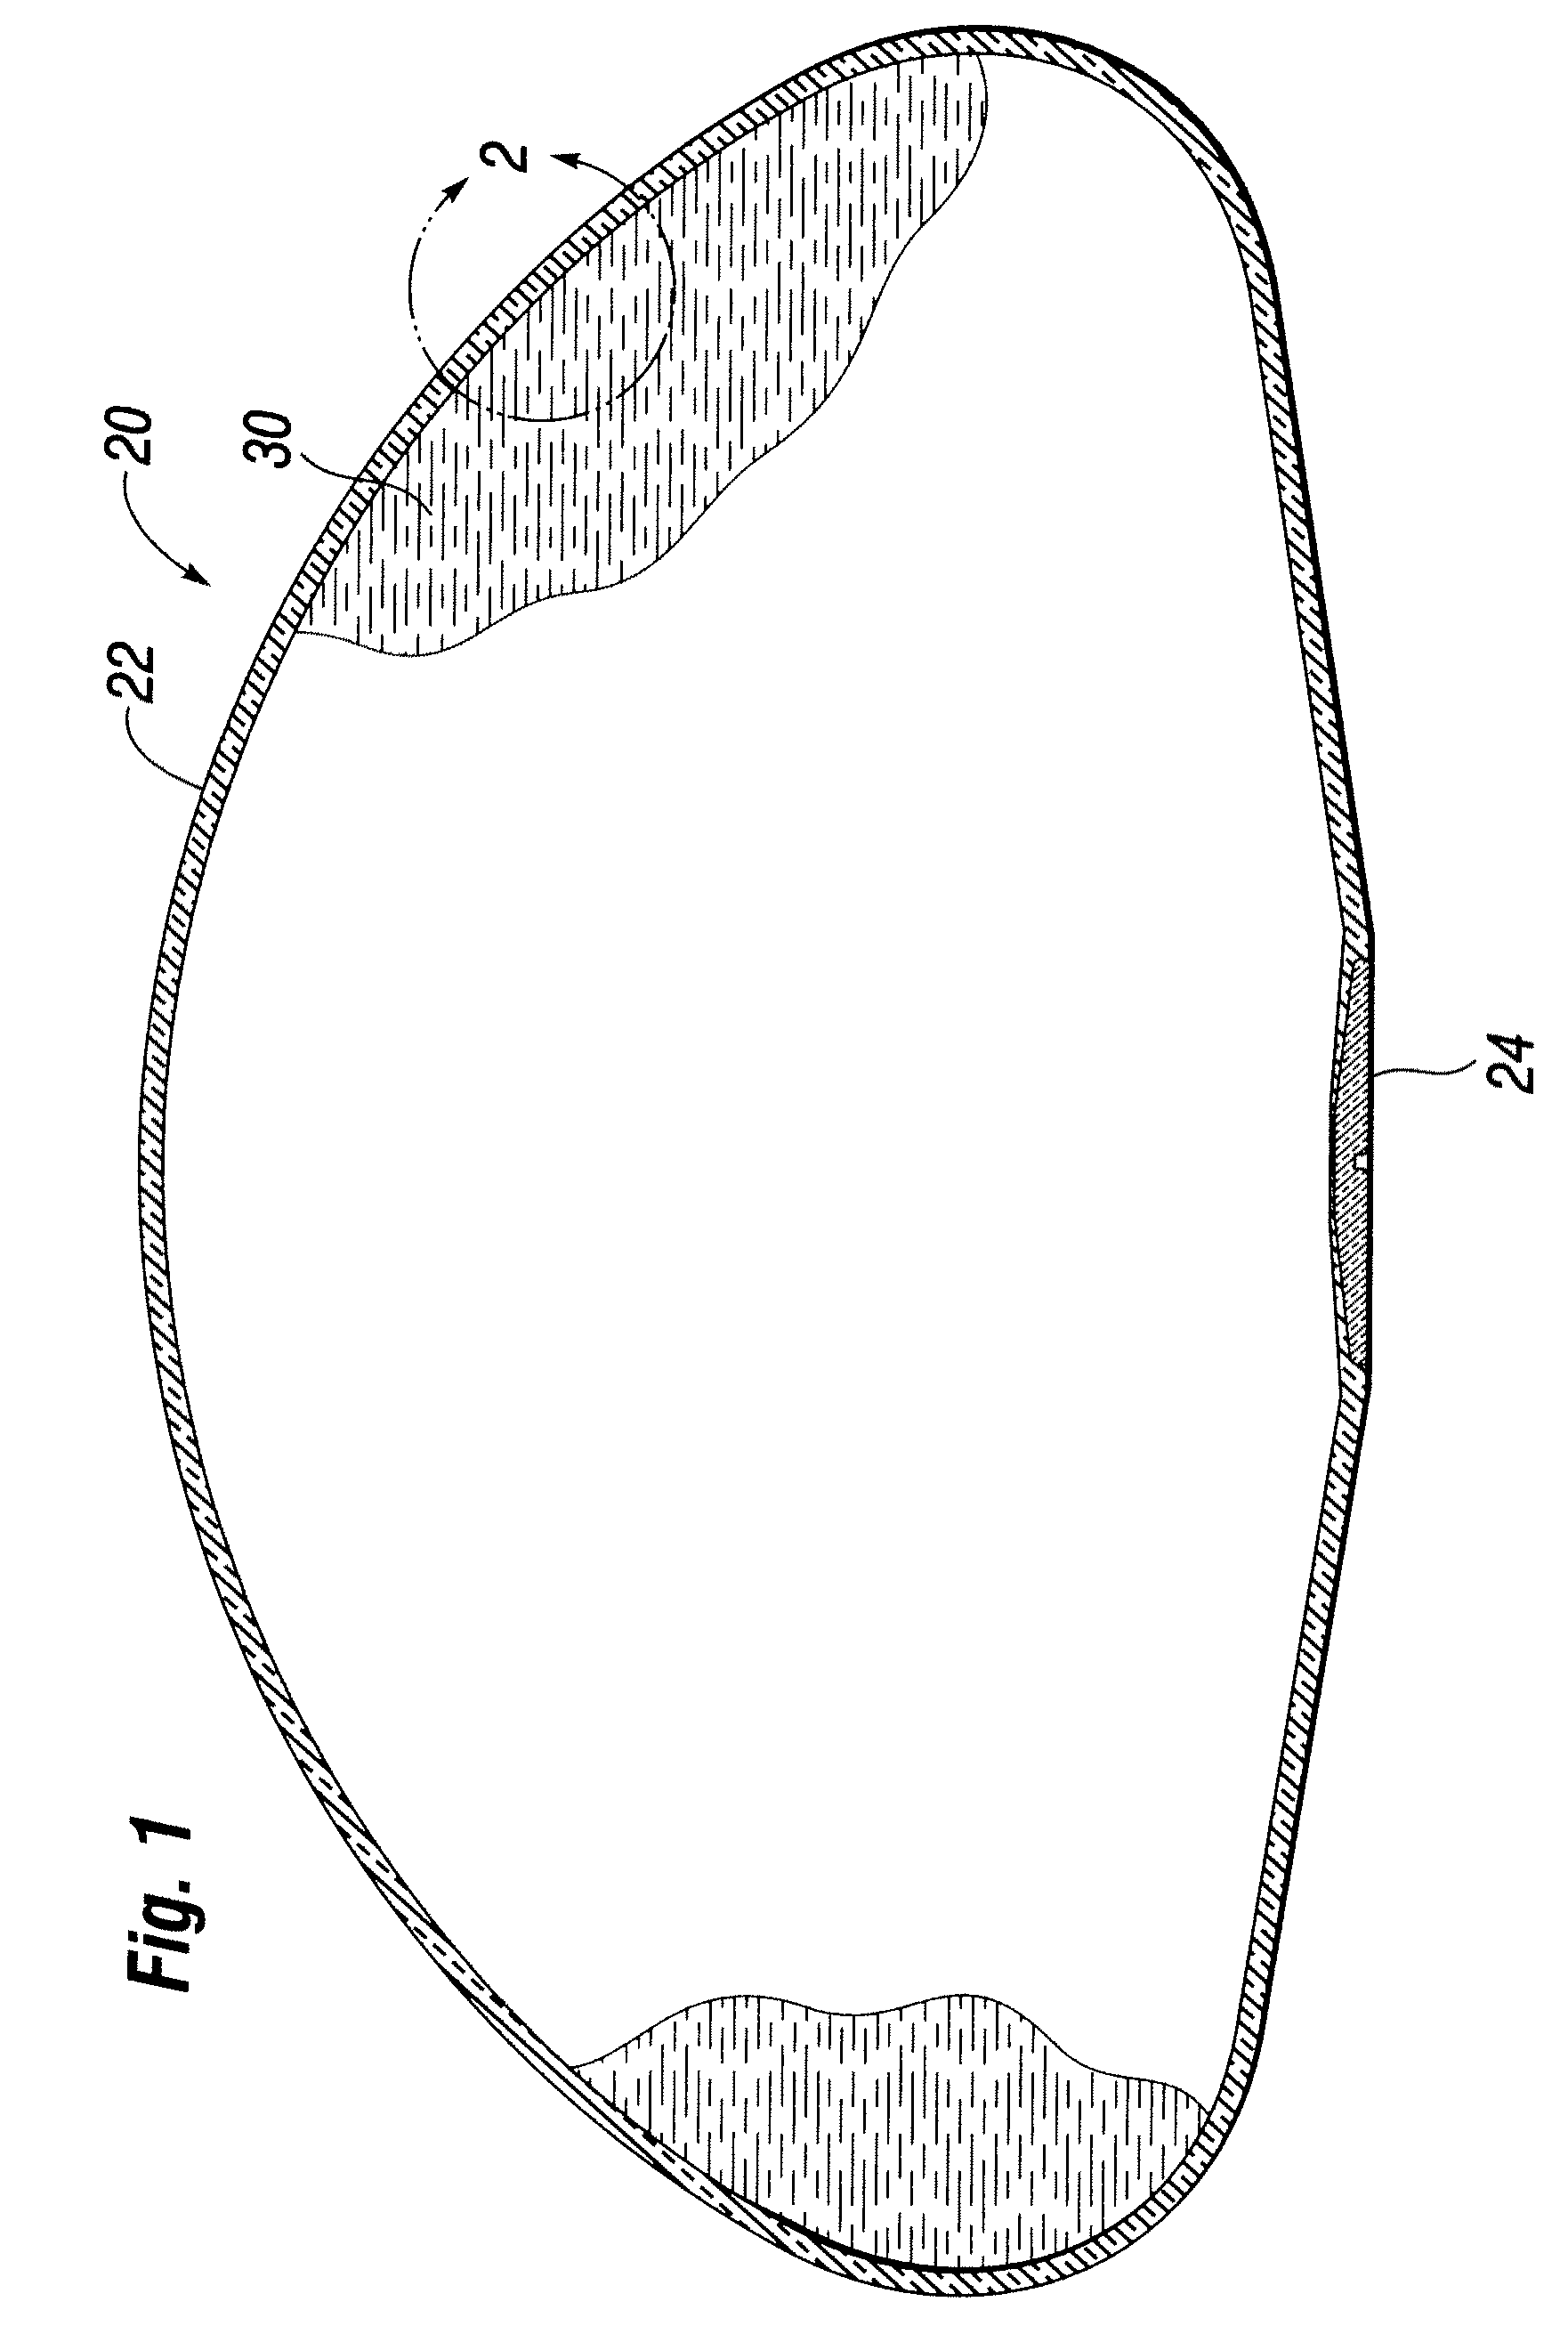 Self-sealing shell for inflatable prostheses